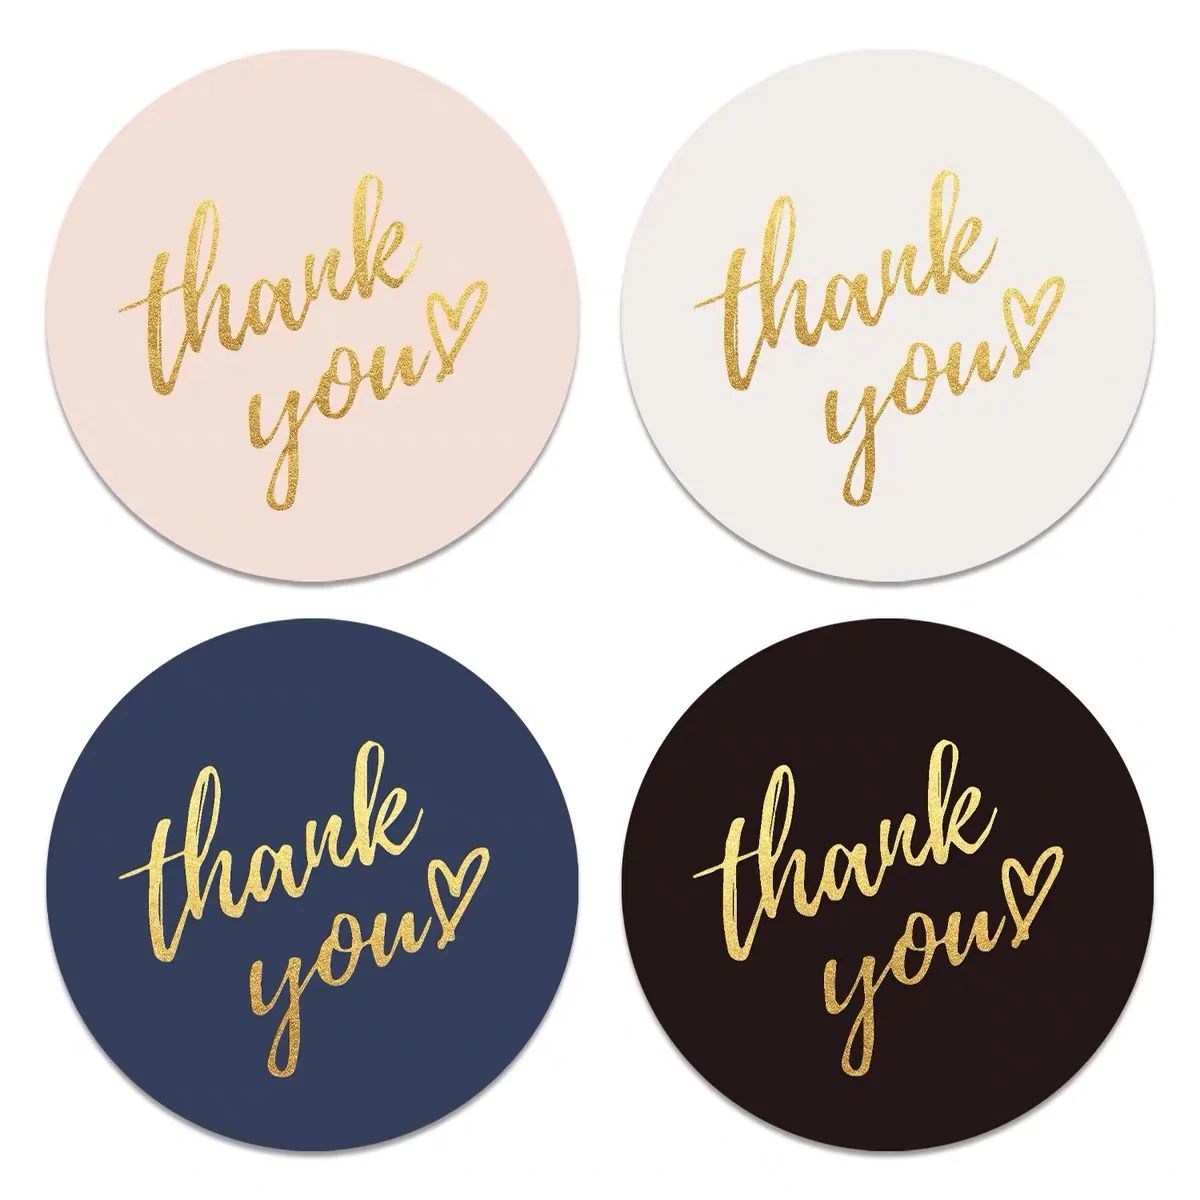 Custom Thank you sticker roll with box black for small business thank you sticker